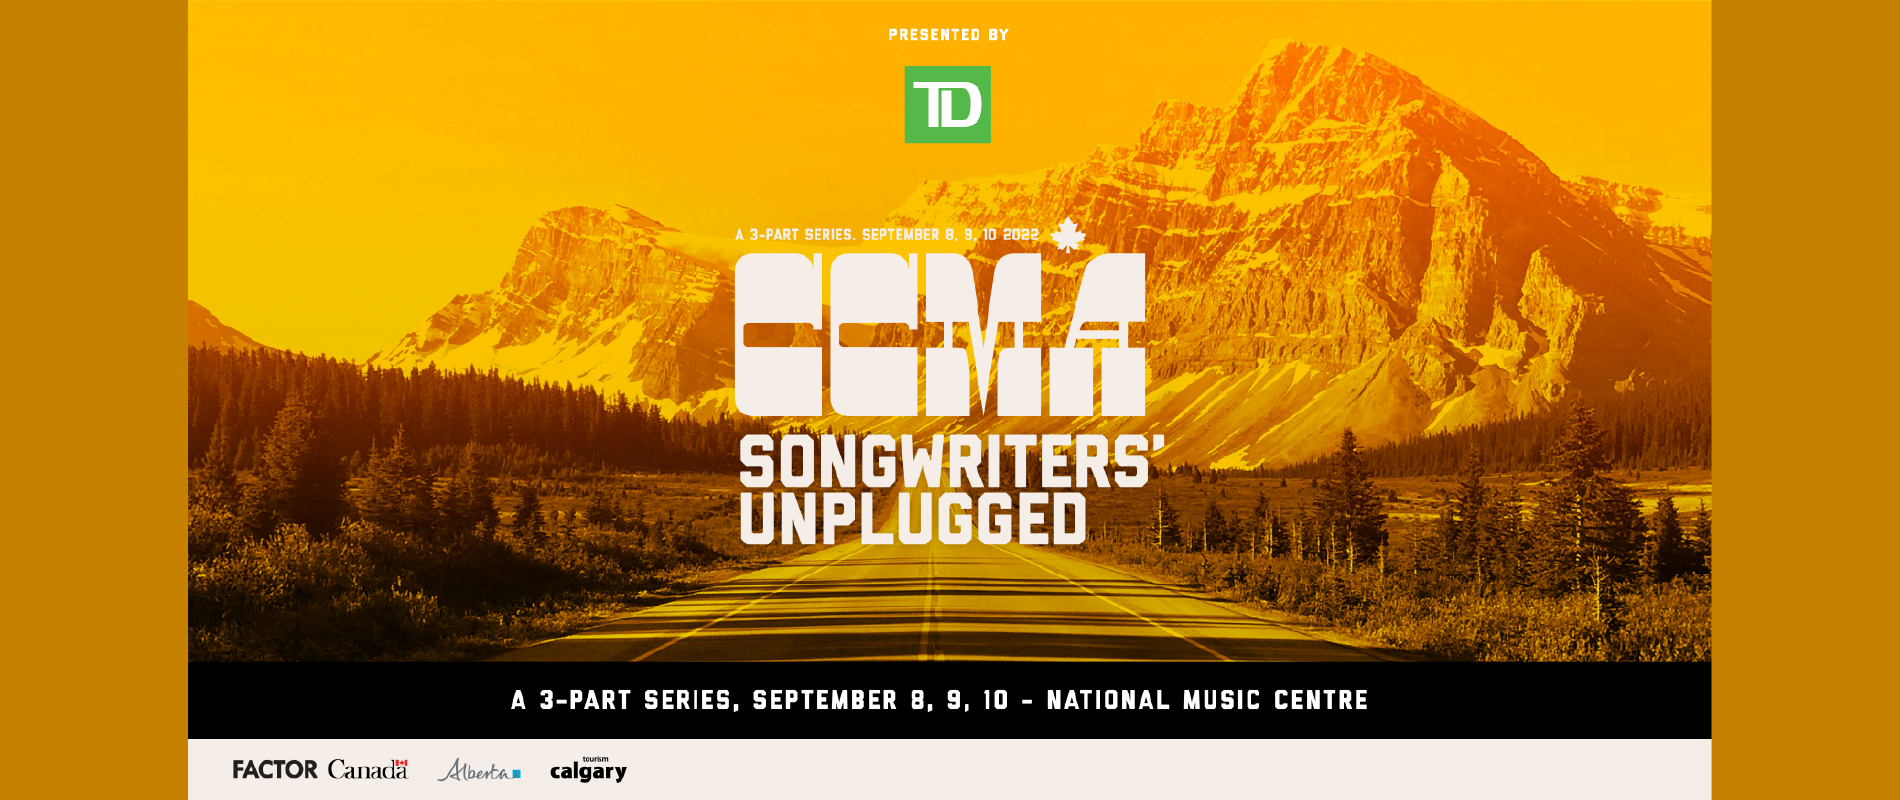 CCMA Songwriters' Unplugged Presented by TD: Session 2